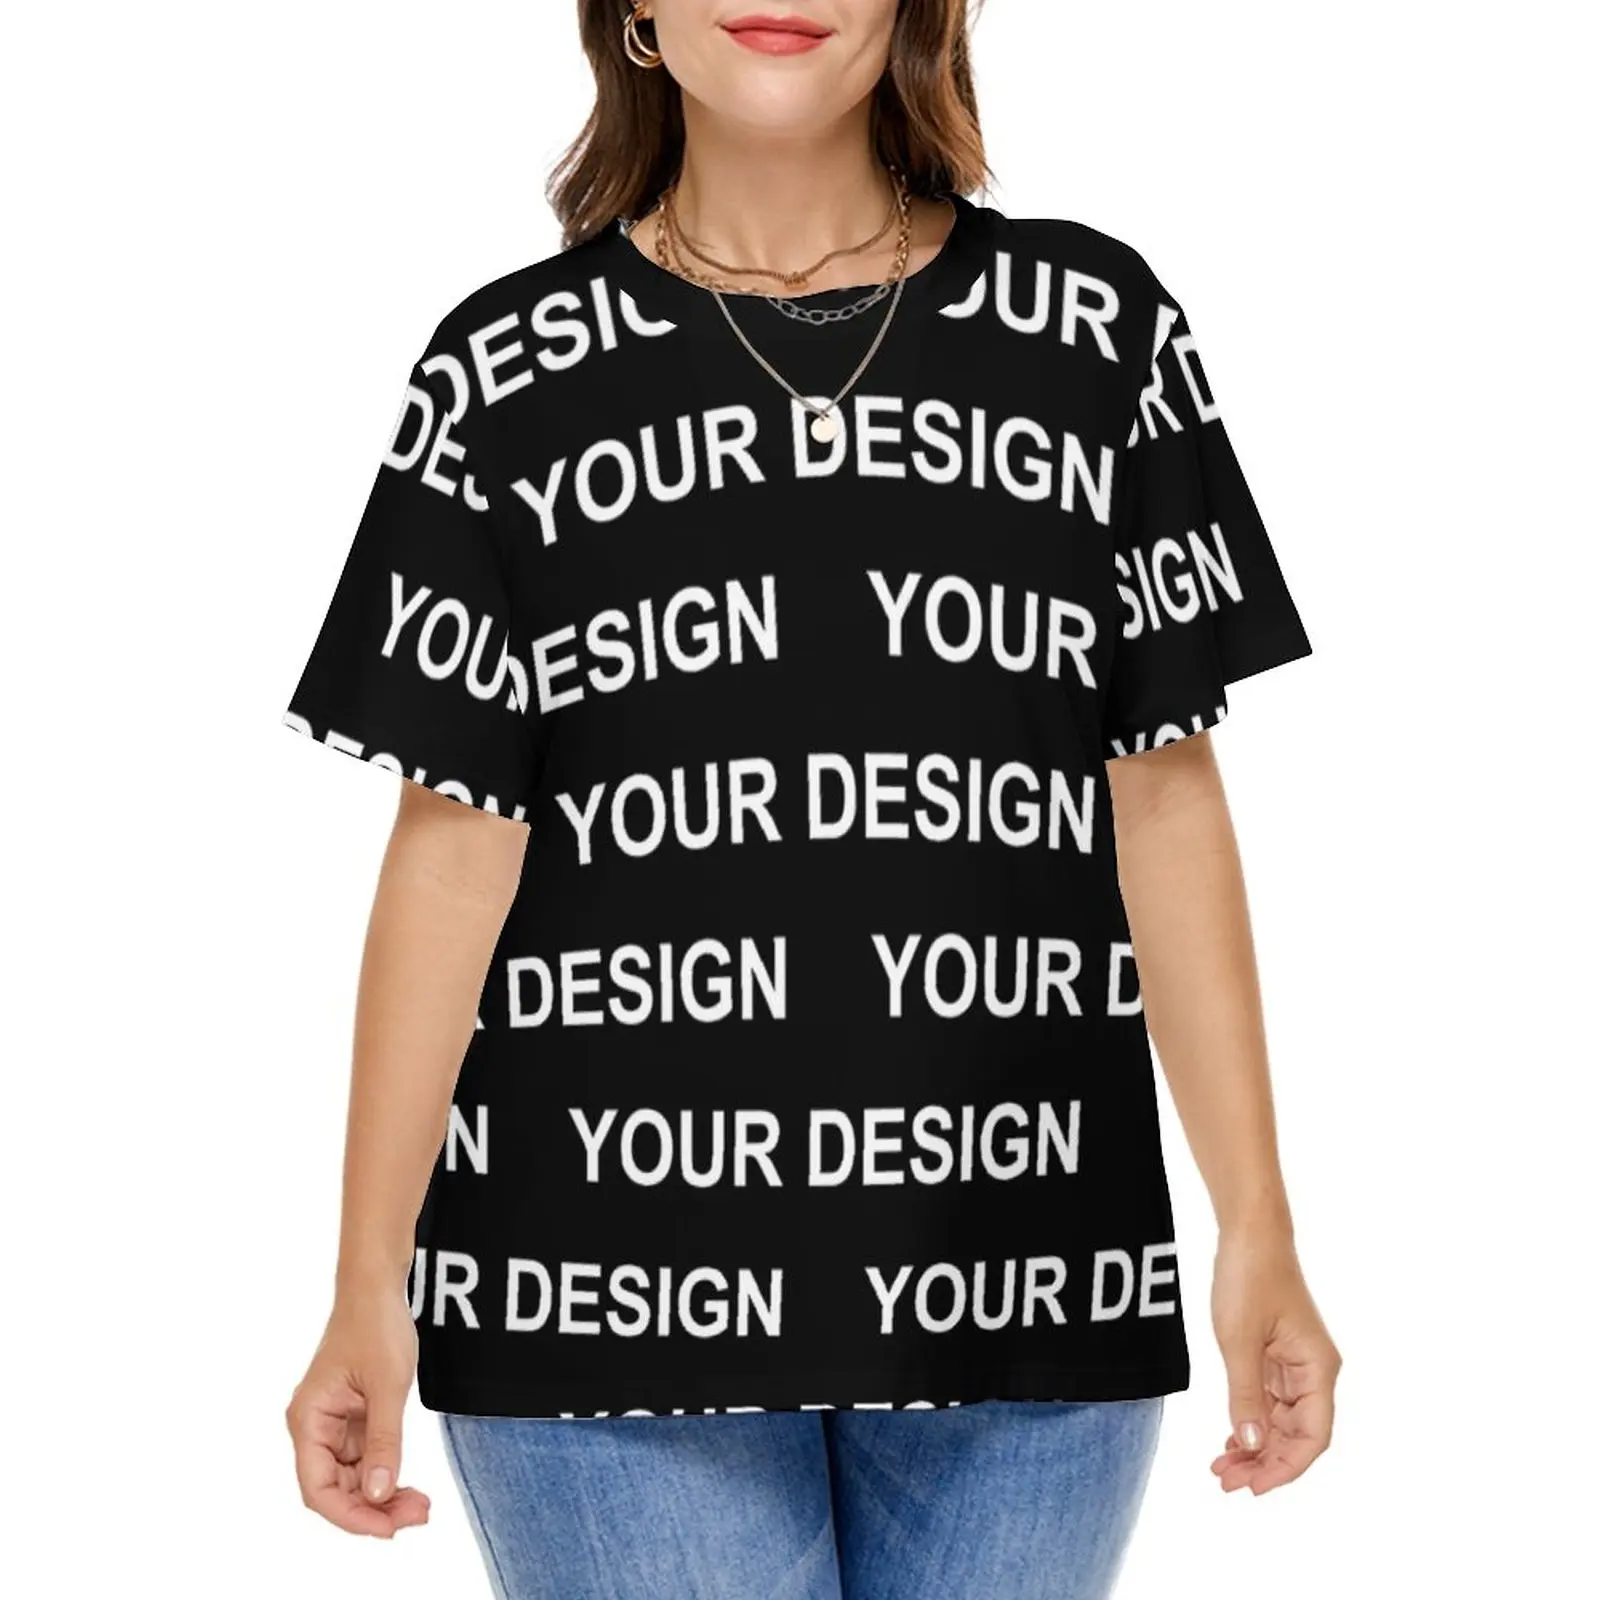 Add Design Customized T Shirt Custom Made Your Image Funny T Shirts Short-Sleeve Print Tshirt Female Casual Tees Plus Size